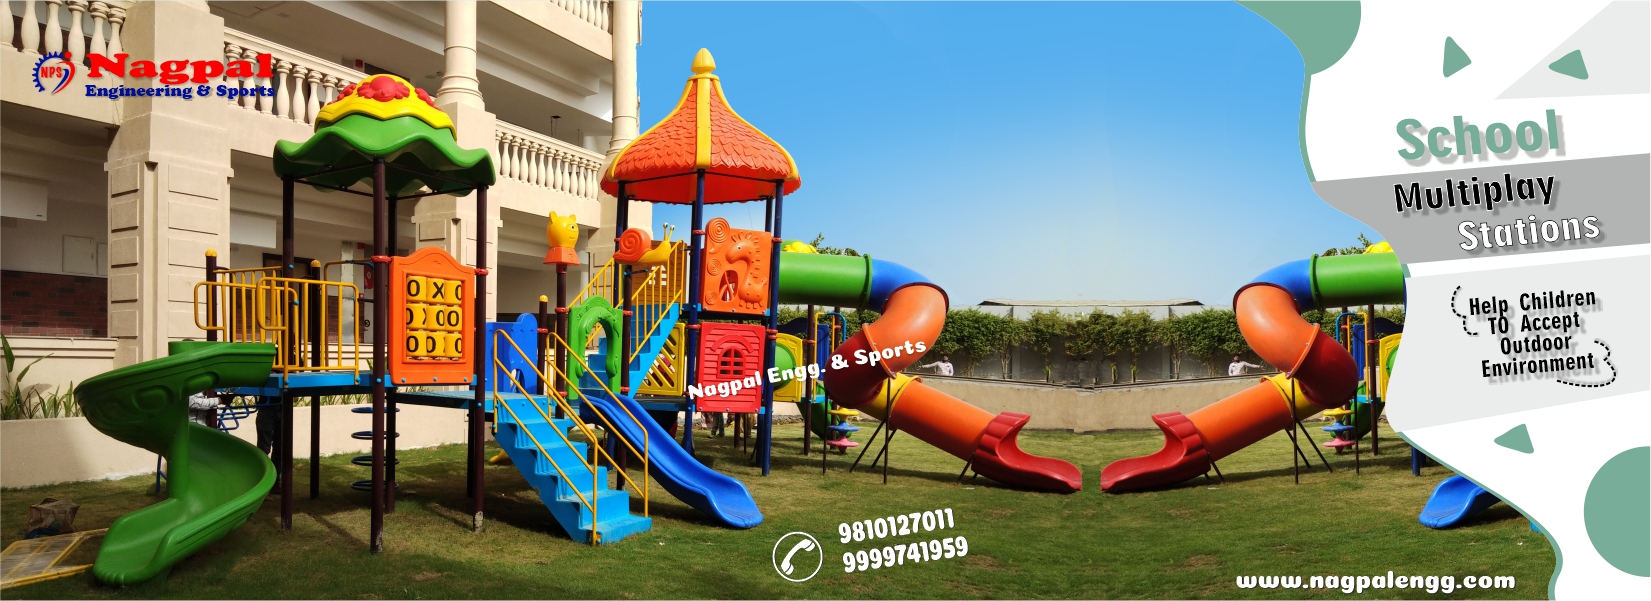 Roto Multiplay System Manufacturers, Exporters & Suppliers in Modi Nagar